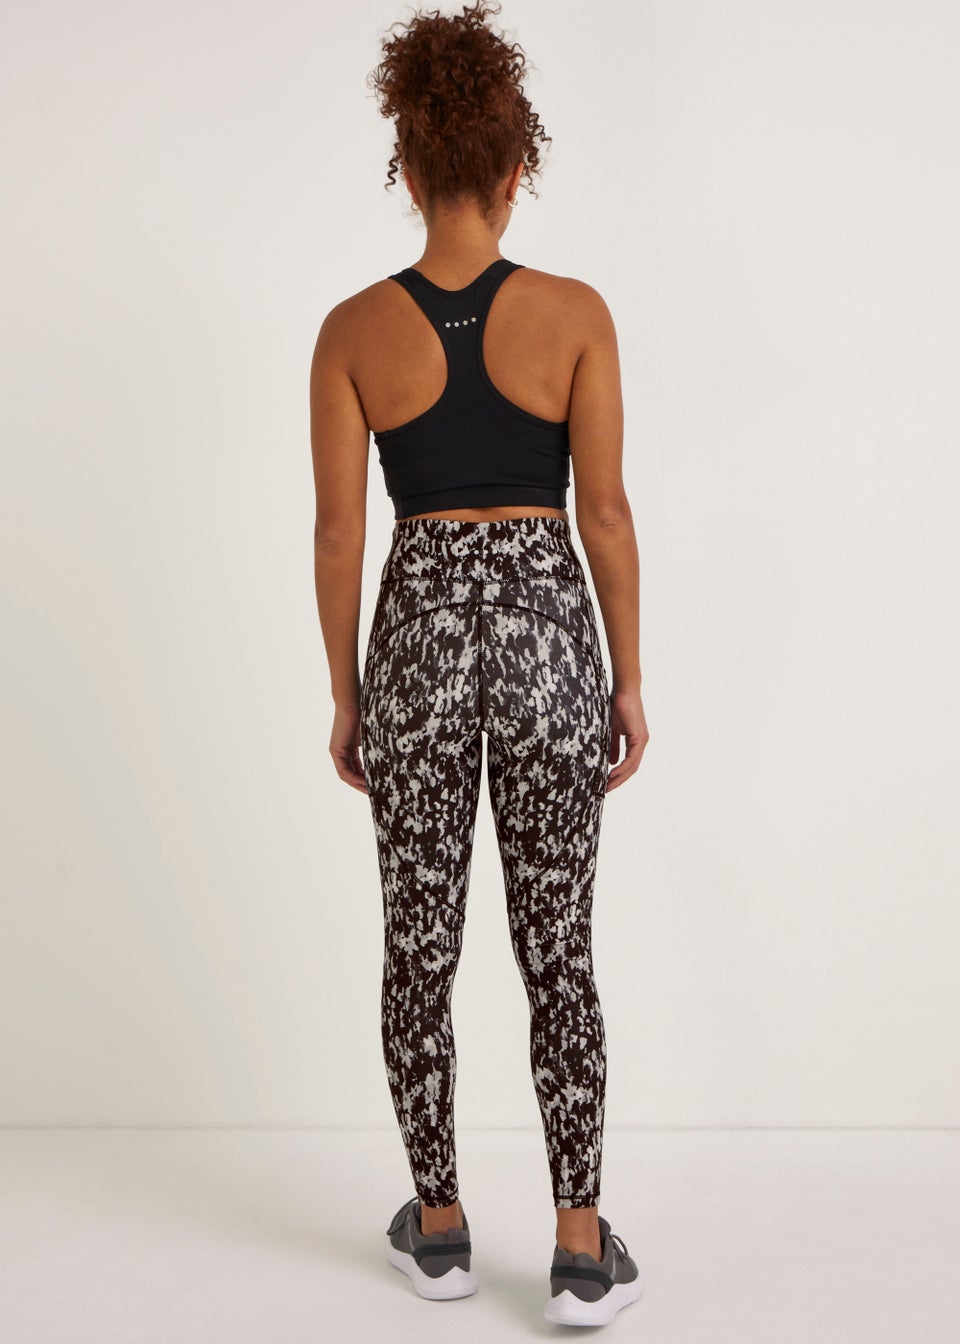 Get in shape with Matalan's stylish Souluxe gym wear range which includes  leggings, sports bras, gym bags and more - Berkshire Live